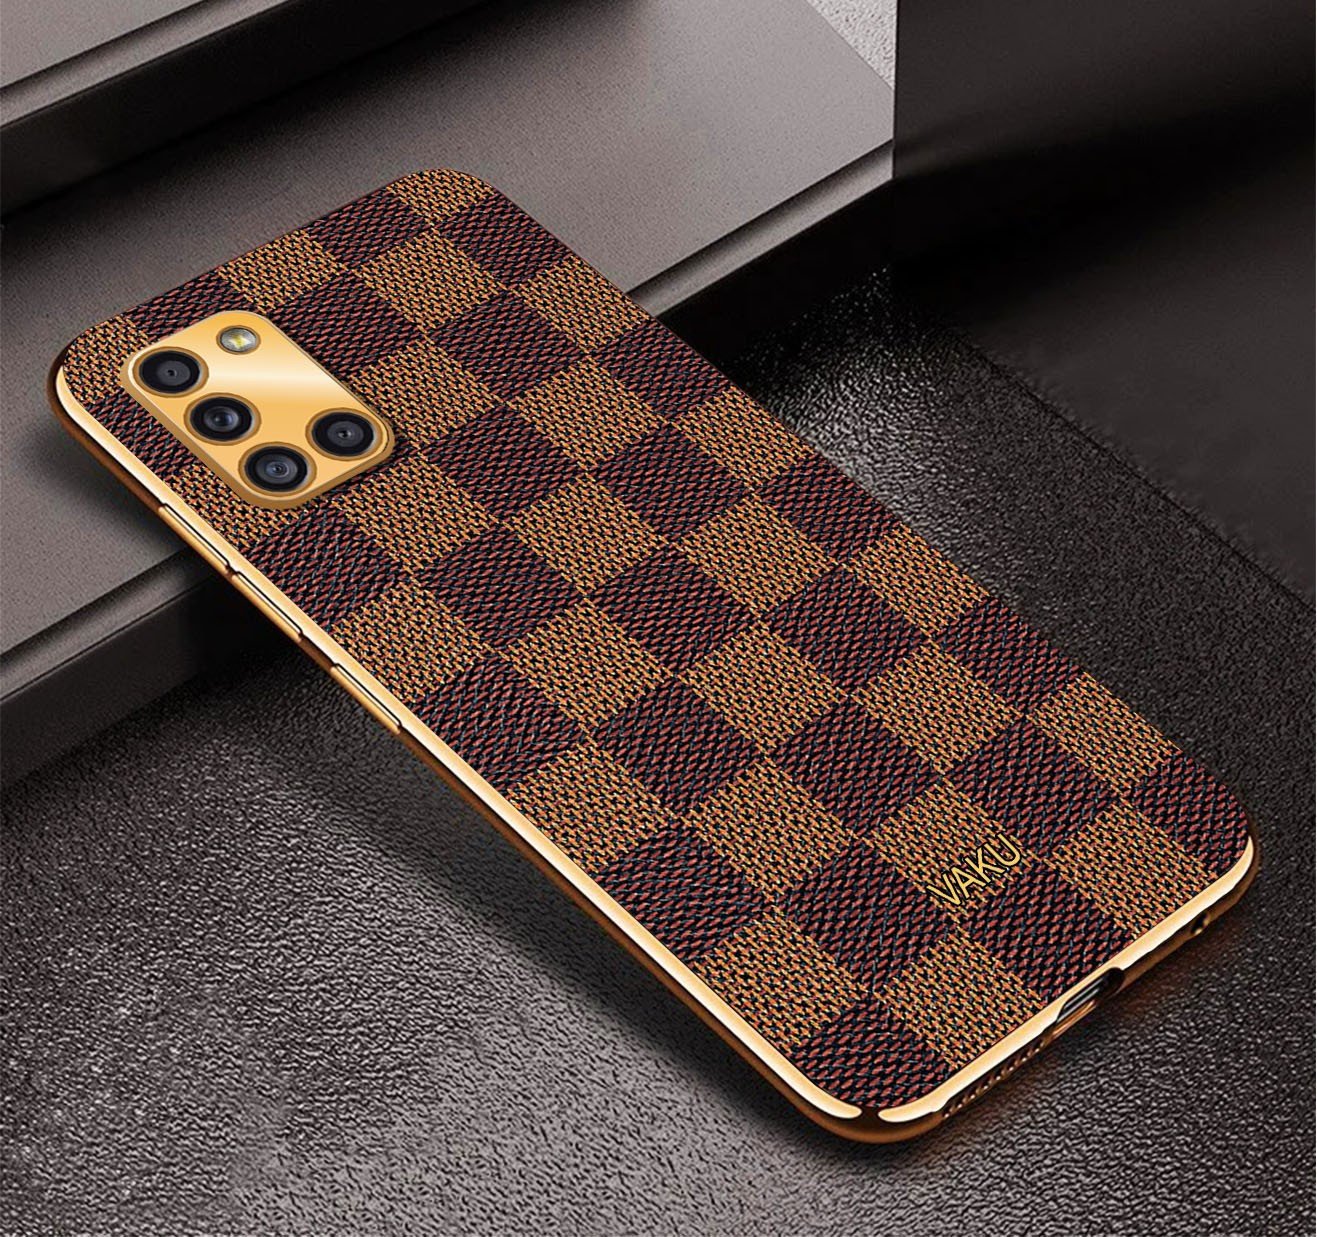 Luxury Leather Canvas Apple iPhone Samsung Galaxy Case  Louis vuitton  phone case, Luxury iphone cases, Iphone case covers